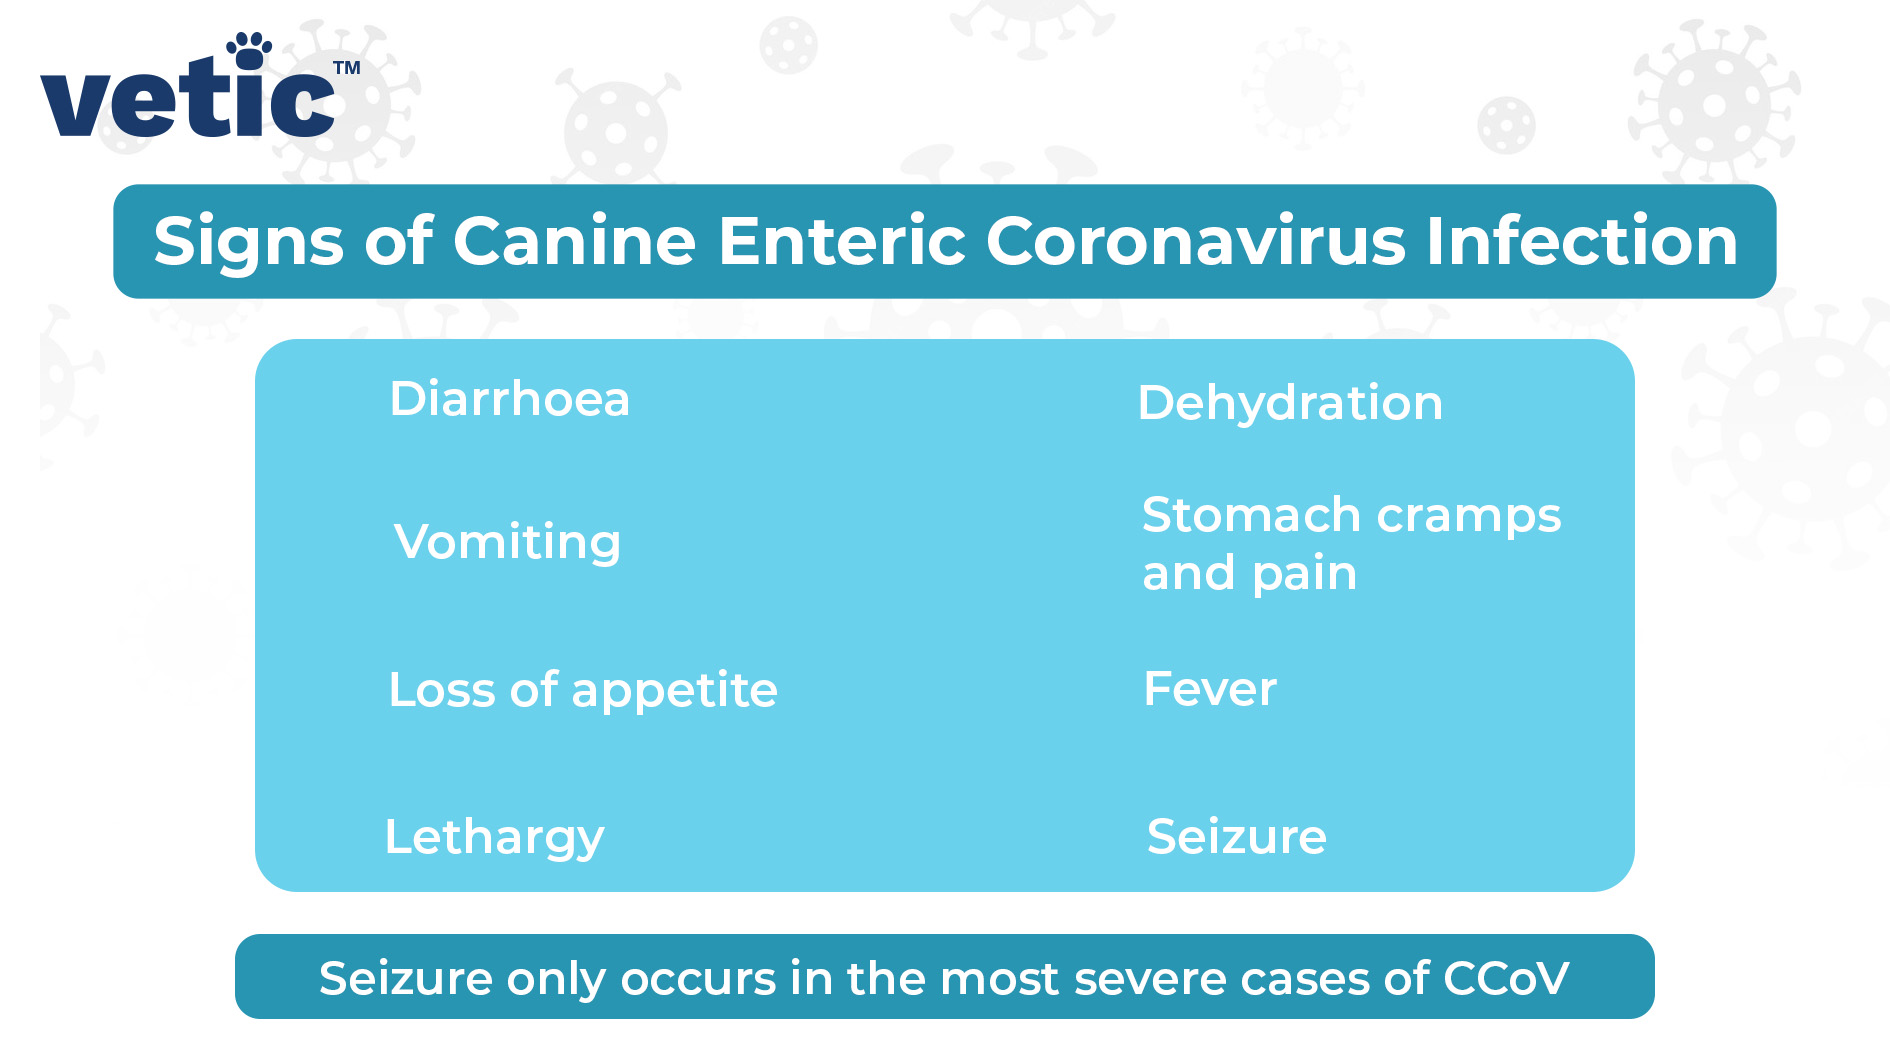 The common signs of the enteric canine coronavirus infection include - Diarrhoea Vomiting Loss of appetite Lethargy Dehydration Stomach cramps and pain Fever Seizure